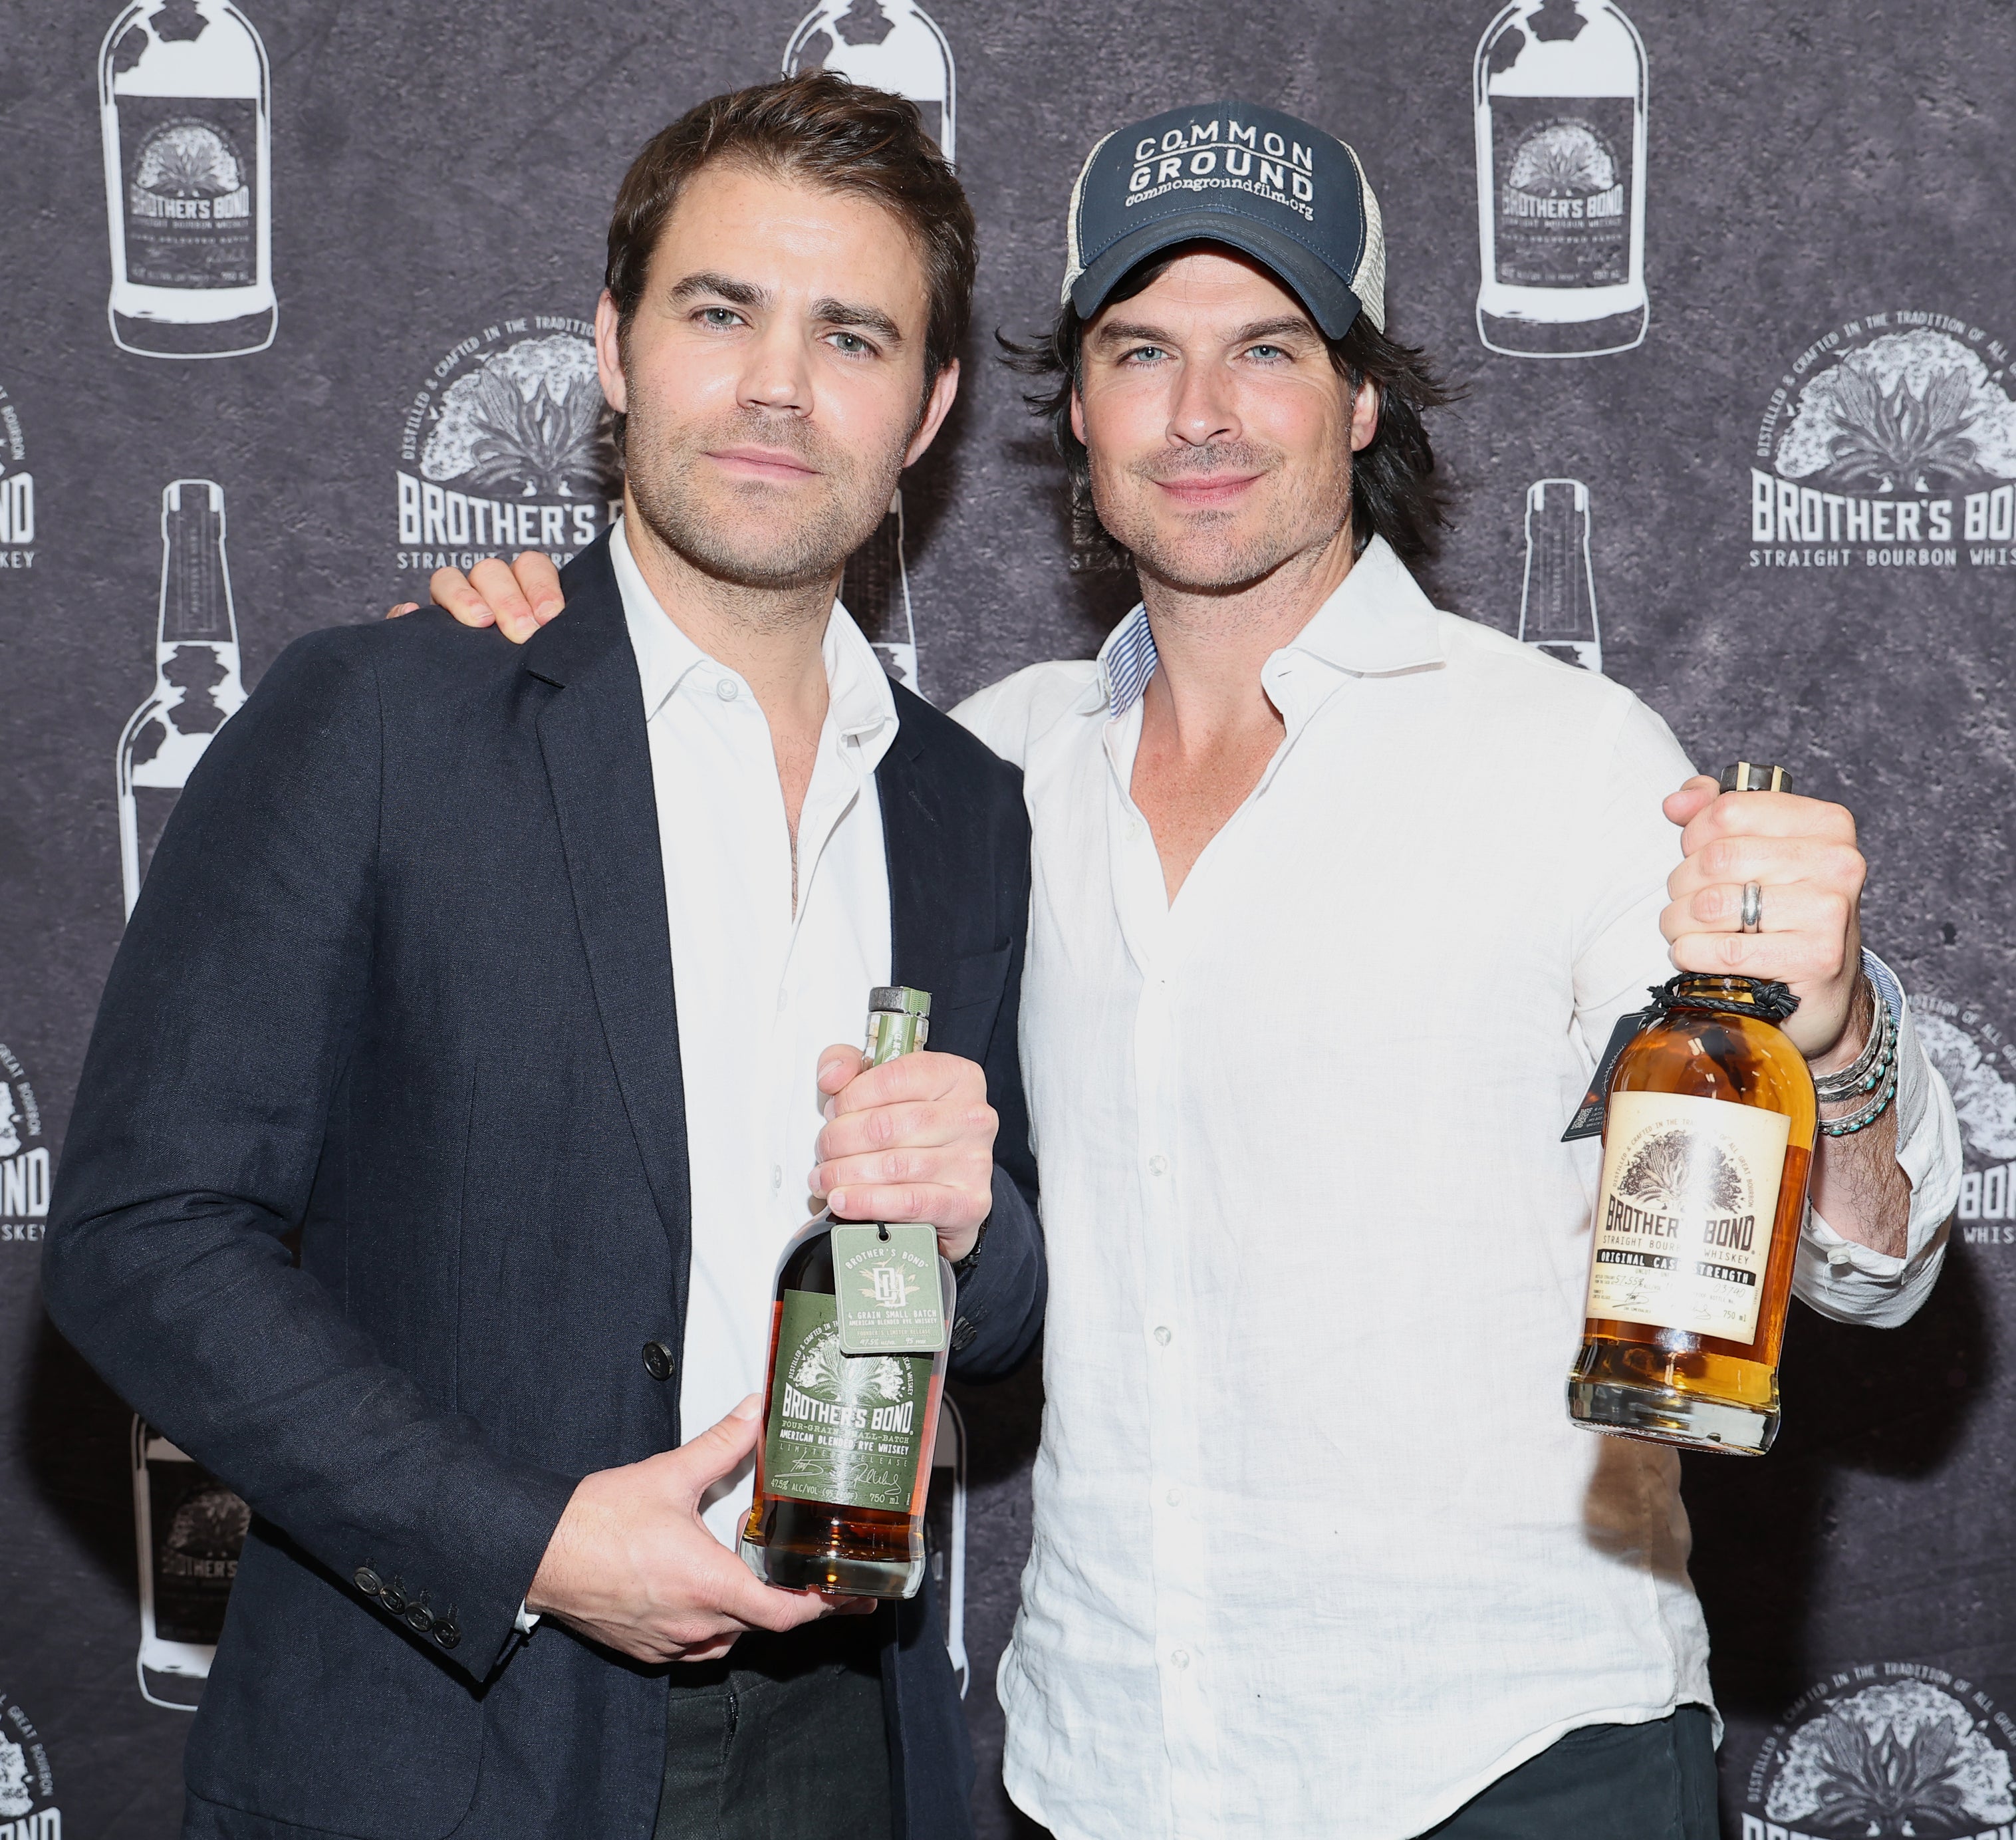 the two holding a bottle of their bourbon